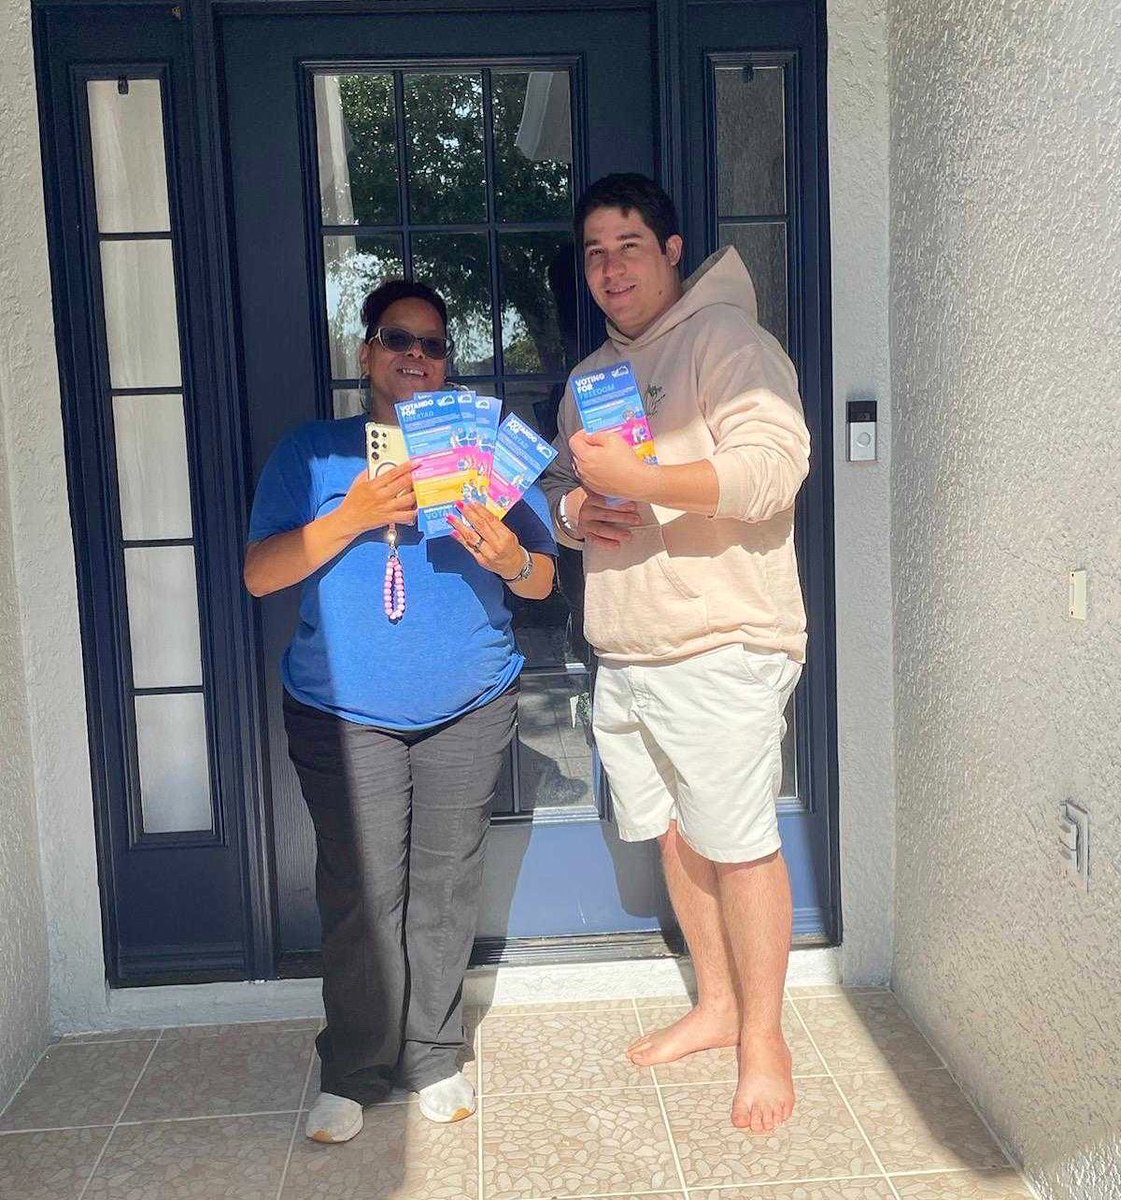 When canvassing for @yes4florida we spoke with Hector, who believes in personal choice — for abortion rights & marijuana use— both on the FL ballot!🗳️ “Each family should have the right to decide what is best for them when it comes to health, life & happiness.” Ty, Hector!💙